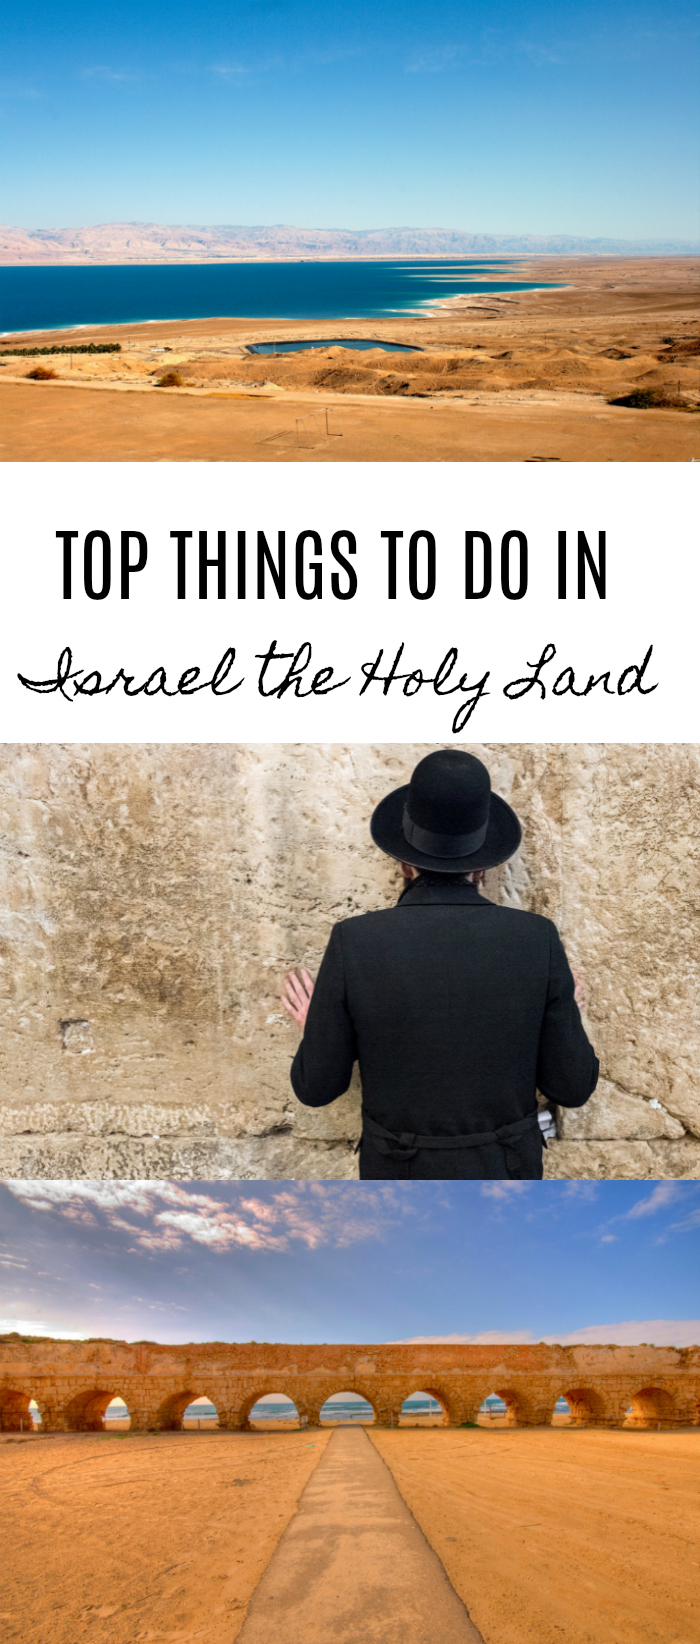 things to do in israel